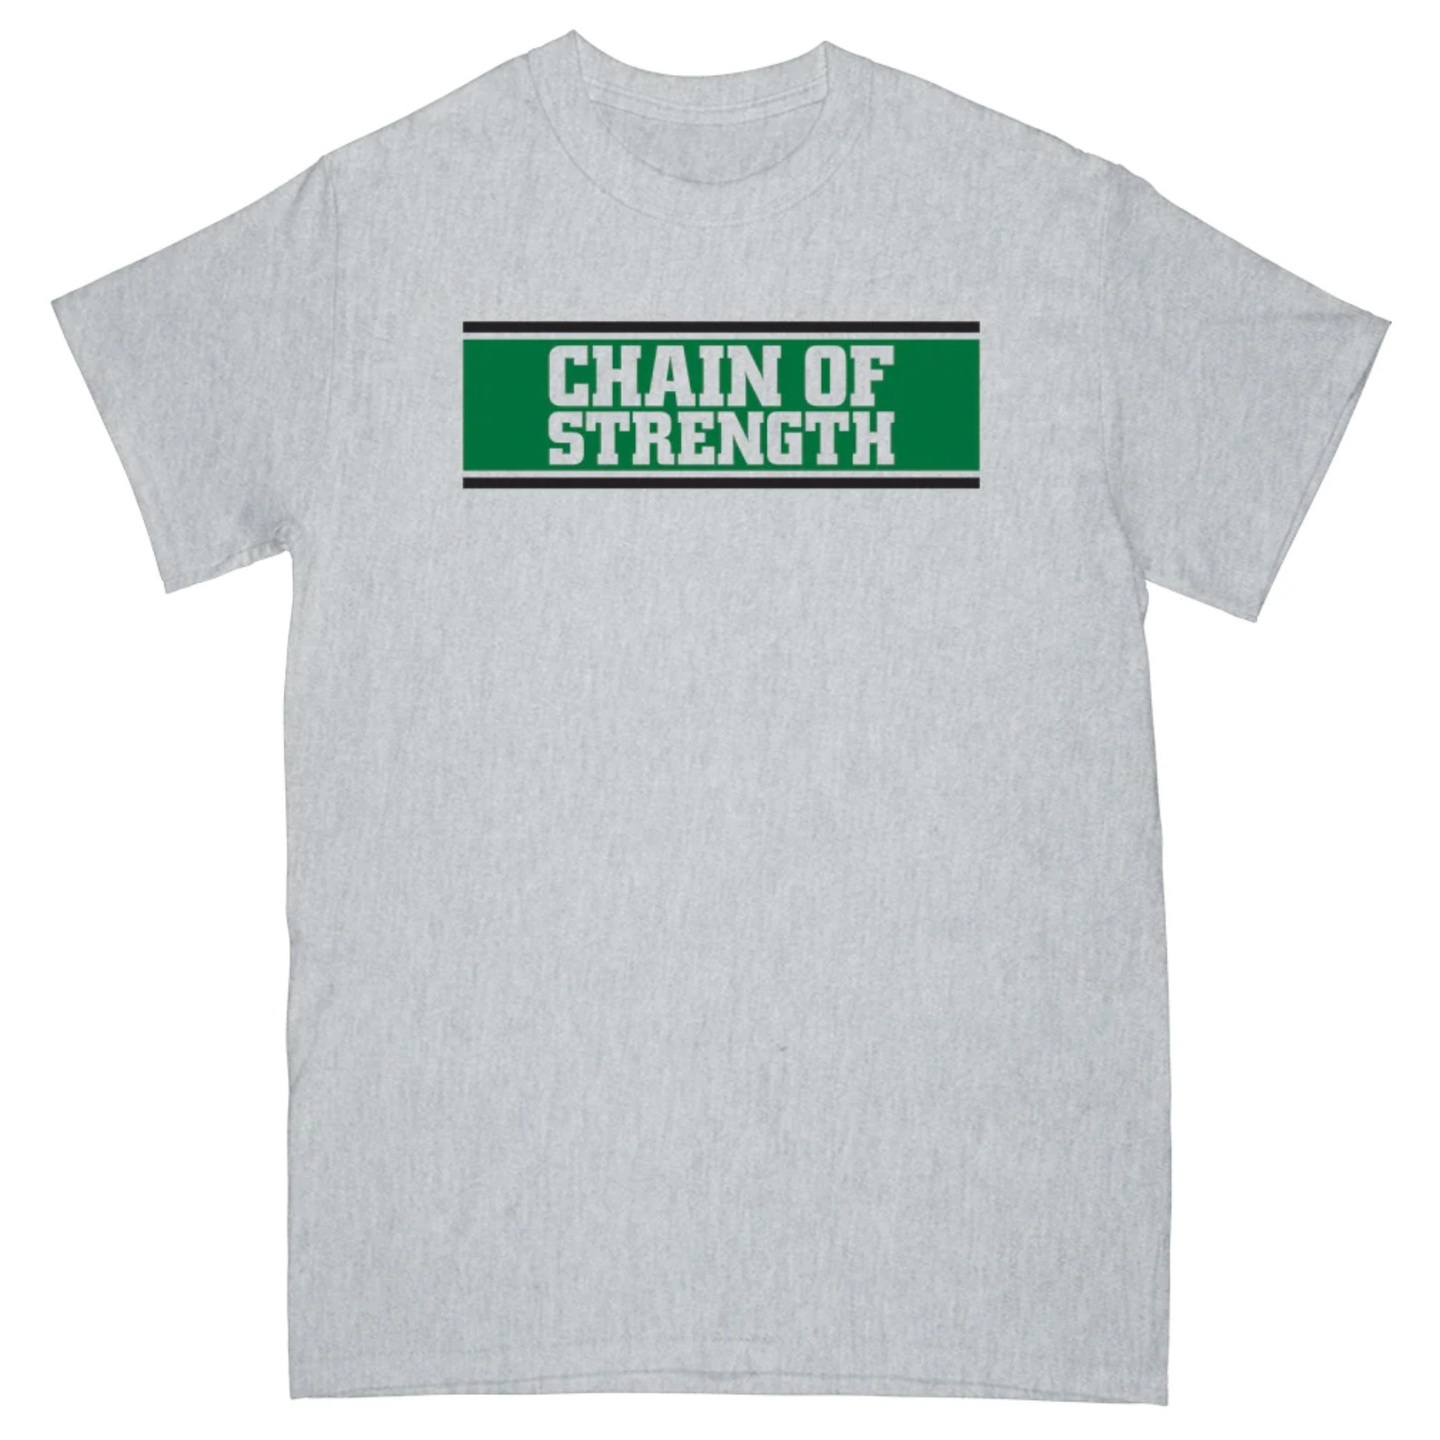 CHAIN OF STRENGTH - The One Thing That Still Holds True Grey